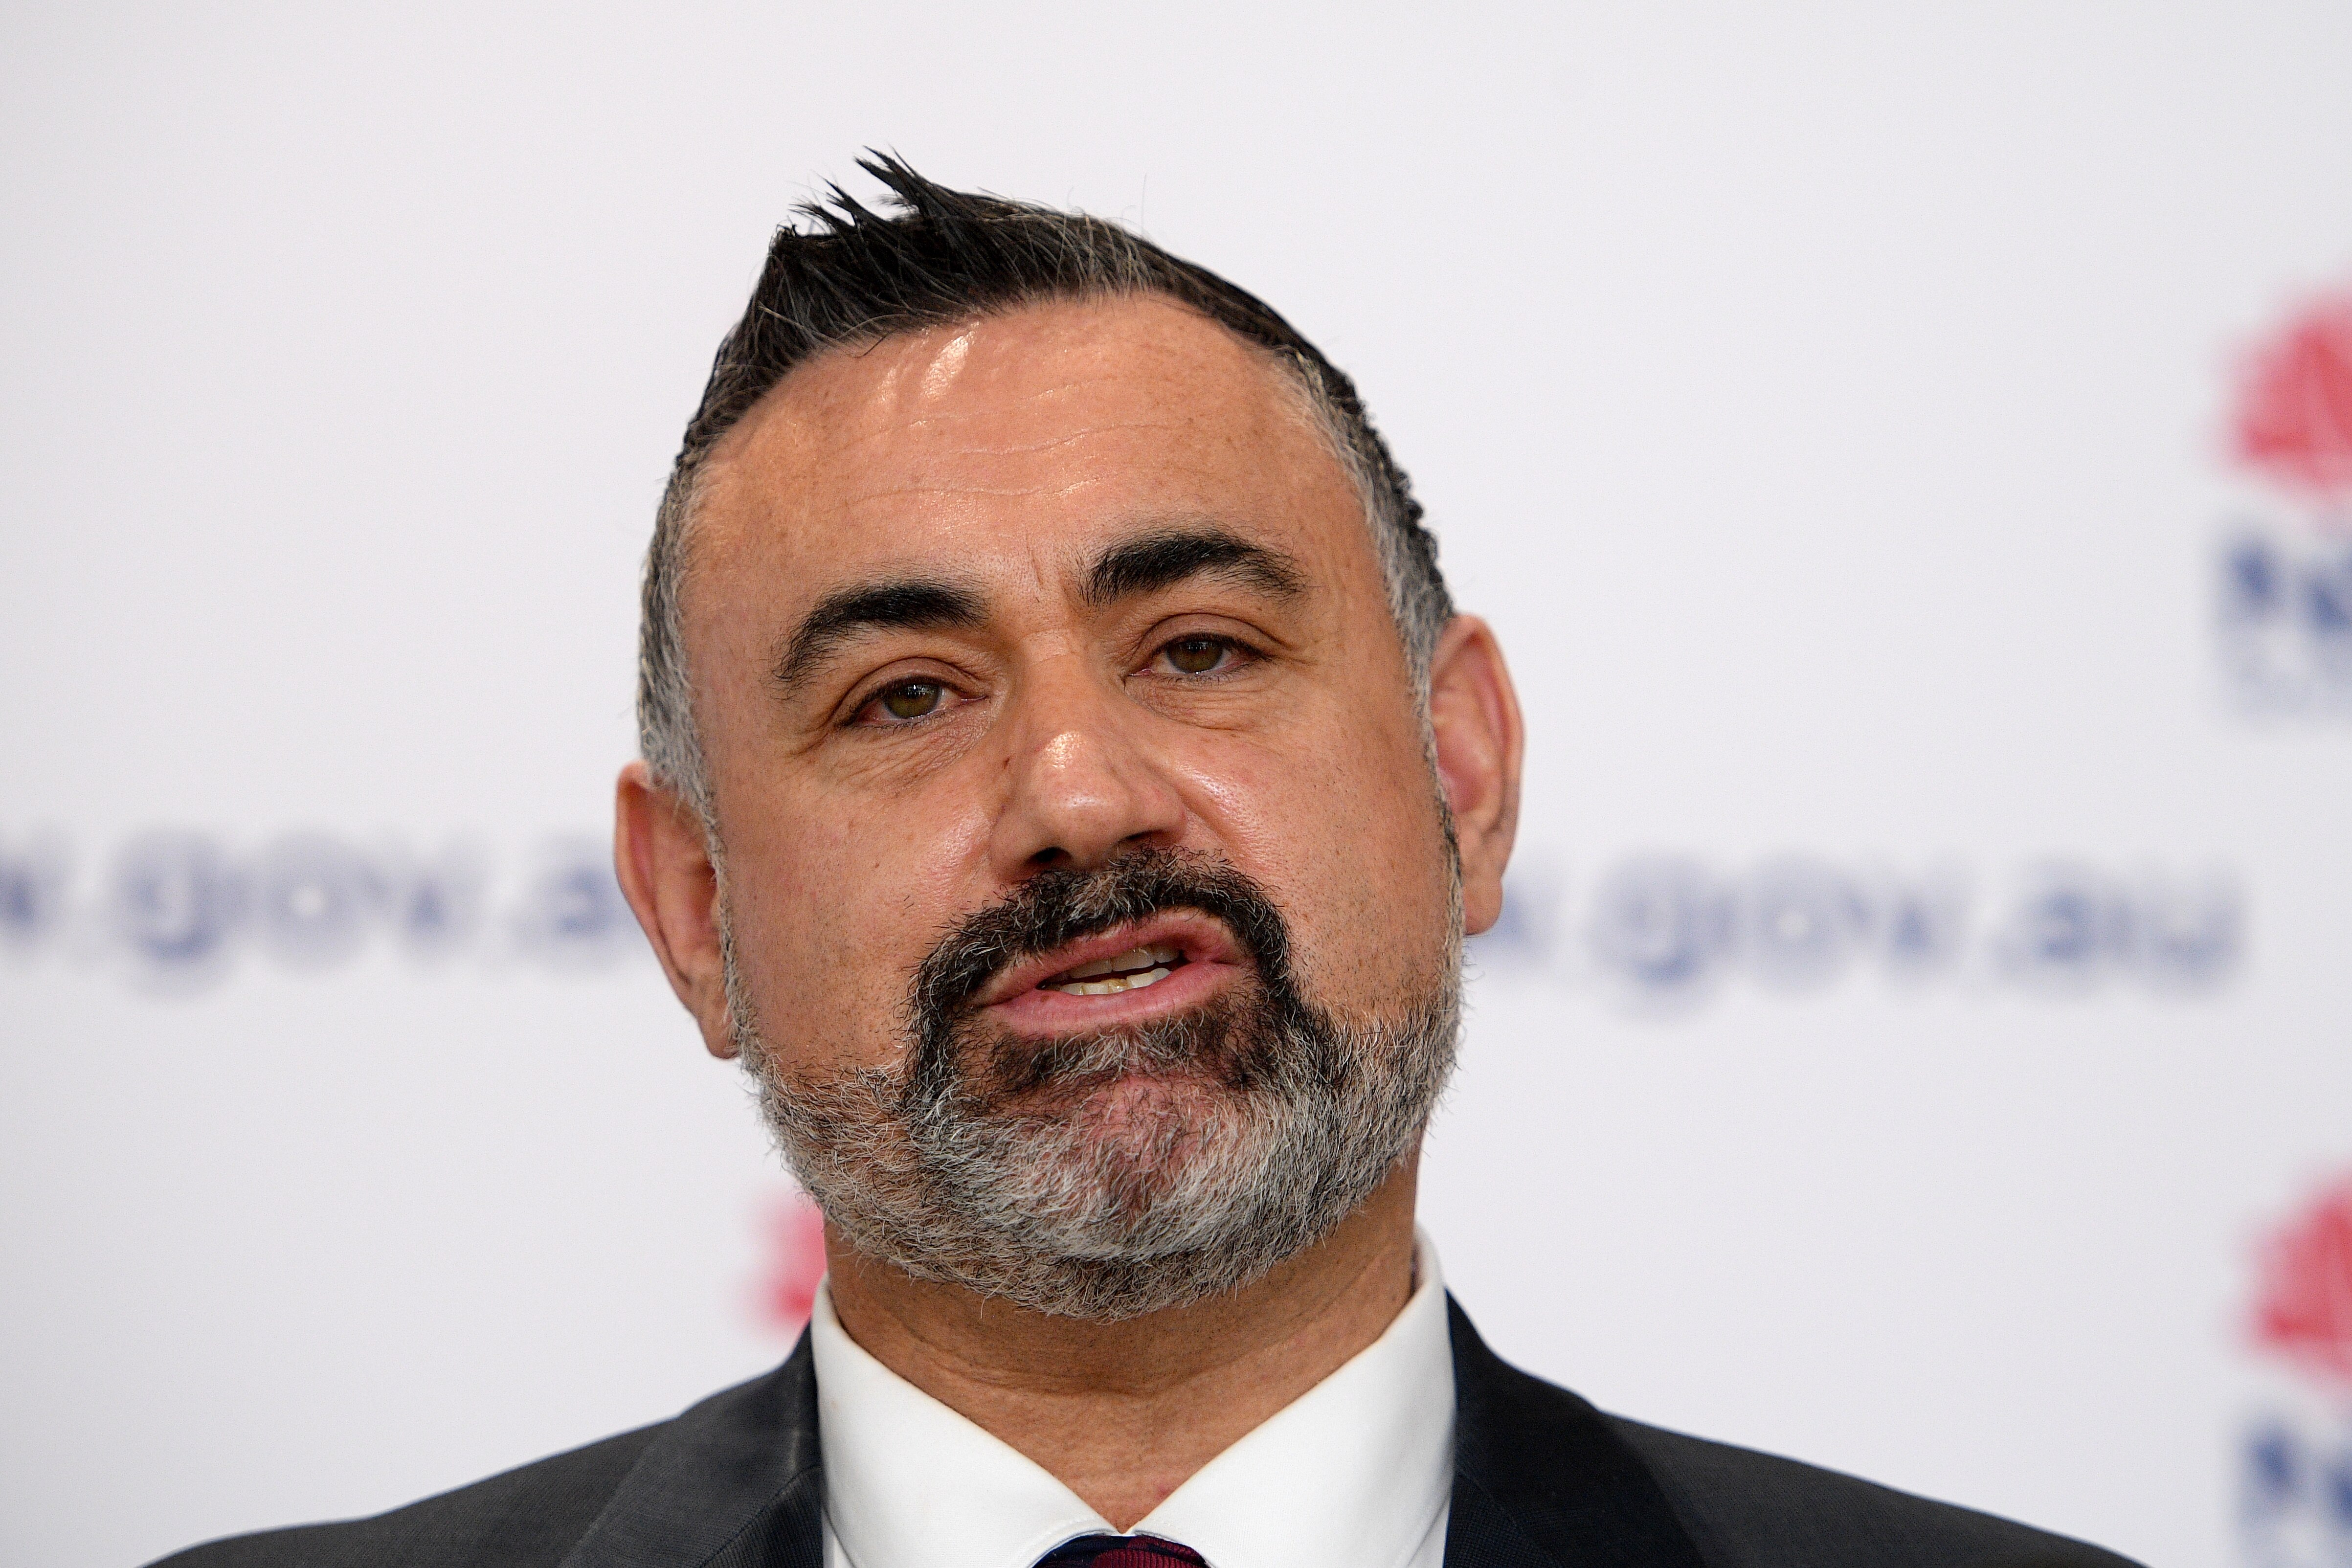 NSW Deputy Premier John Barilaro addresses media during a press conference in Sydney, Tuesday, August 17, 2021. (AAP Image/Dan Himbrechts) NO ARCHIVING